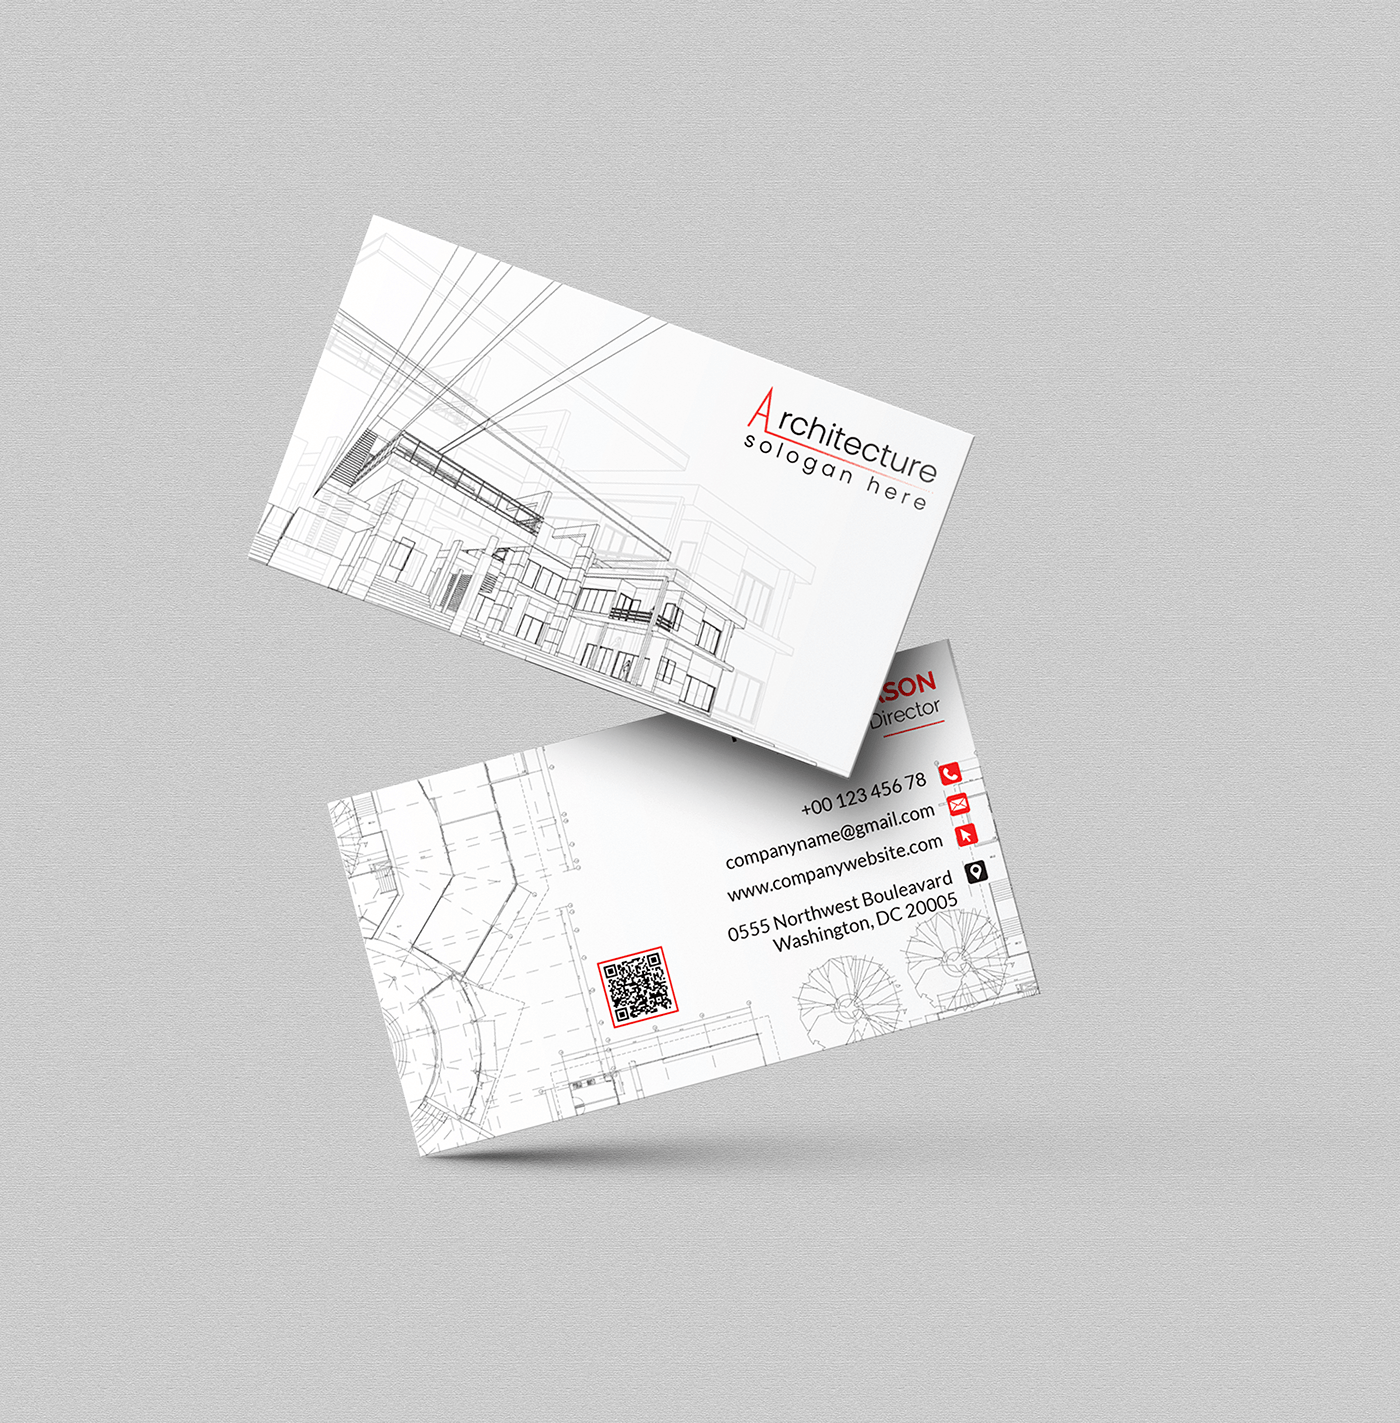 architecture visiting card Business Cards card design visiting business card Business card design modern visiting card design modern business